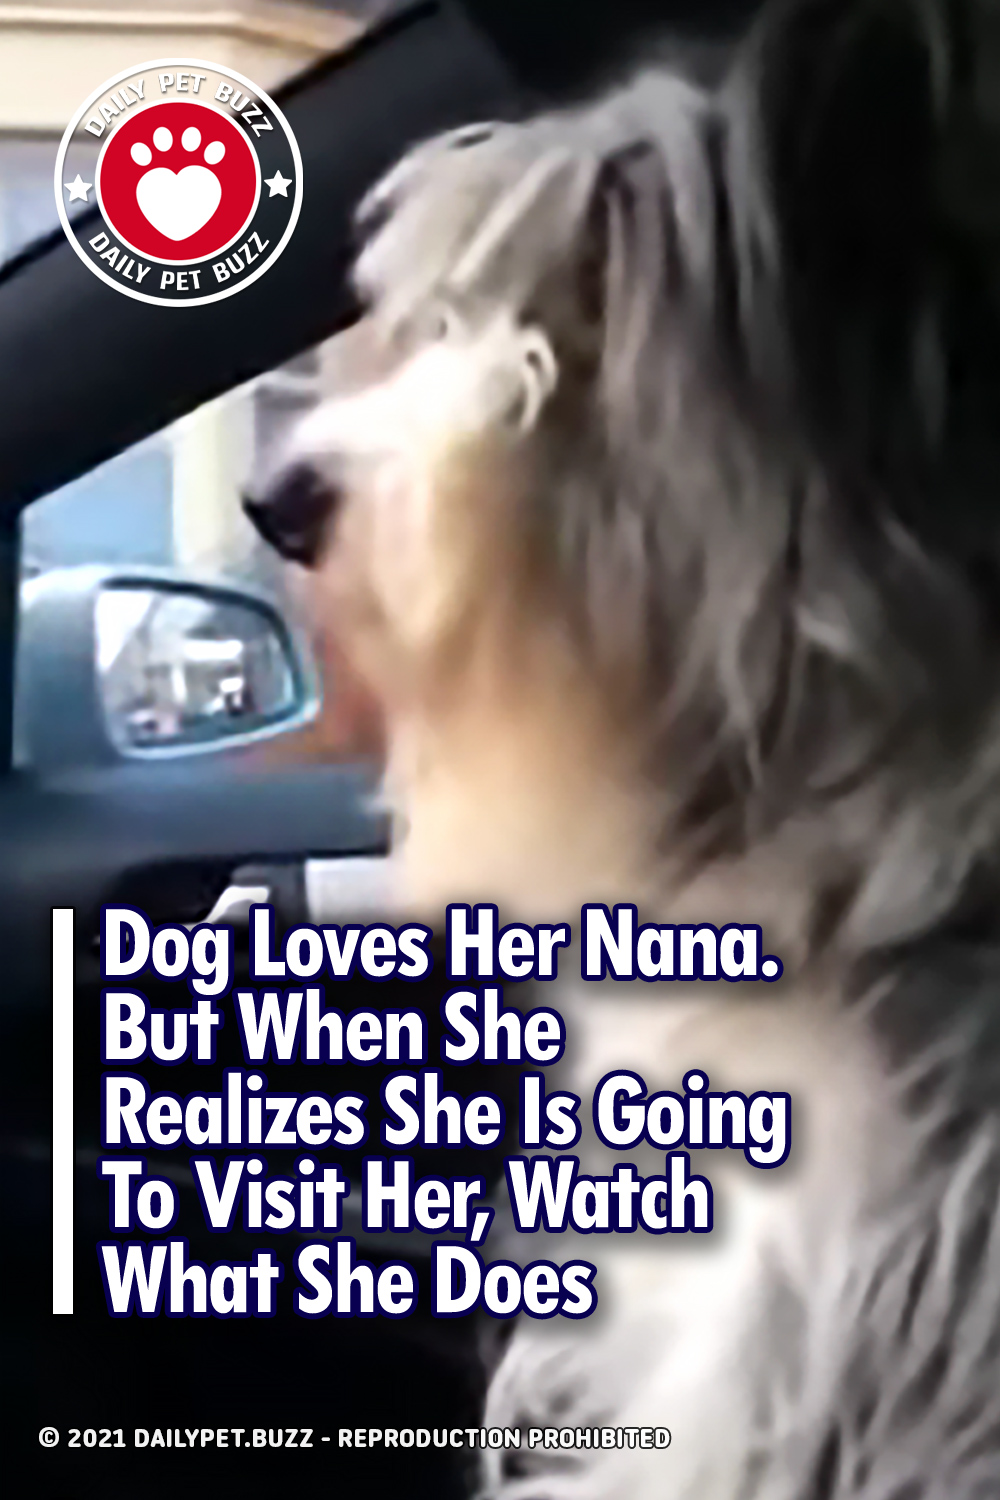 Dog Loves Her Nana. But When She Realizes She Is Going To Visit Her, Watch What She Does